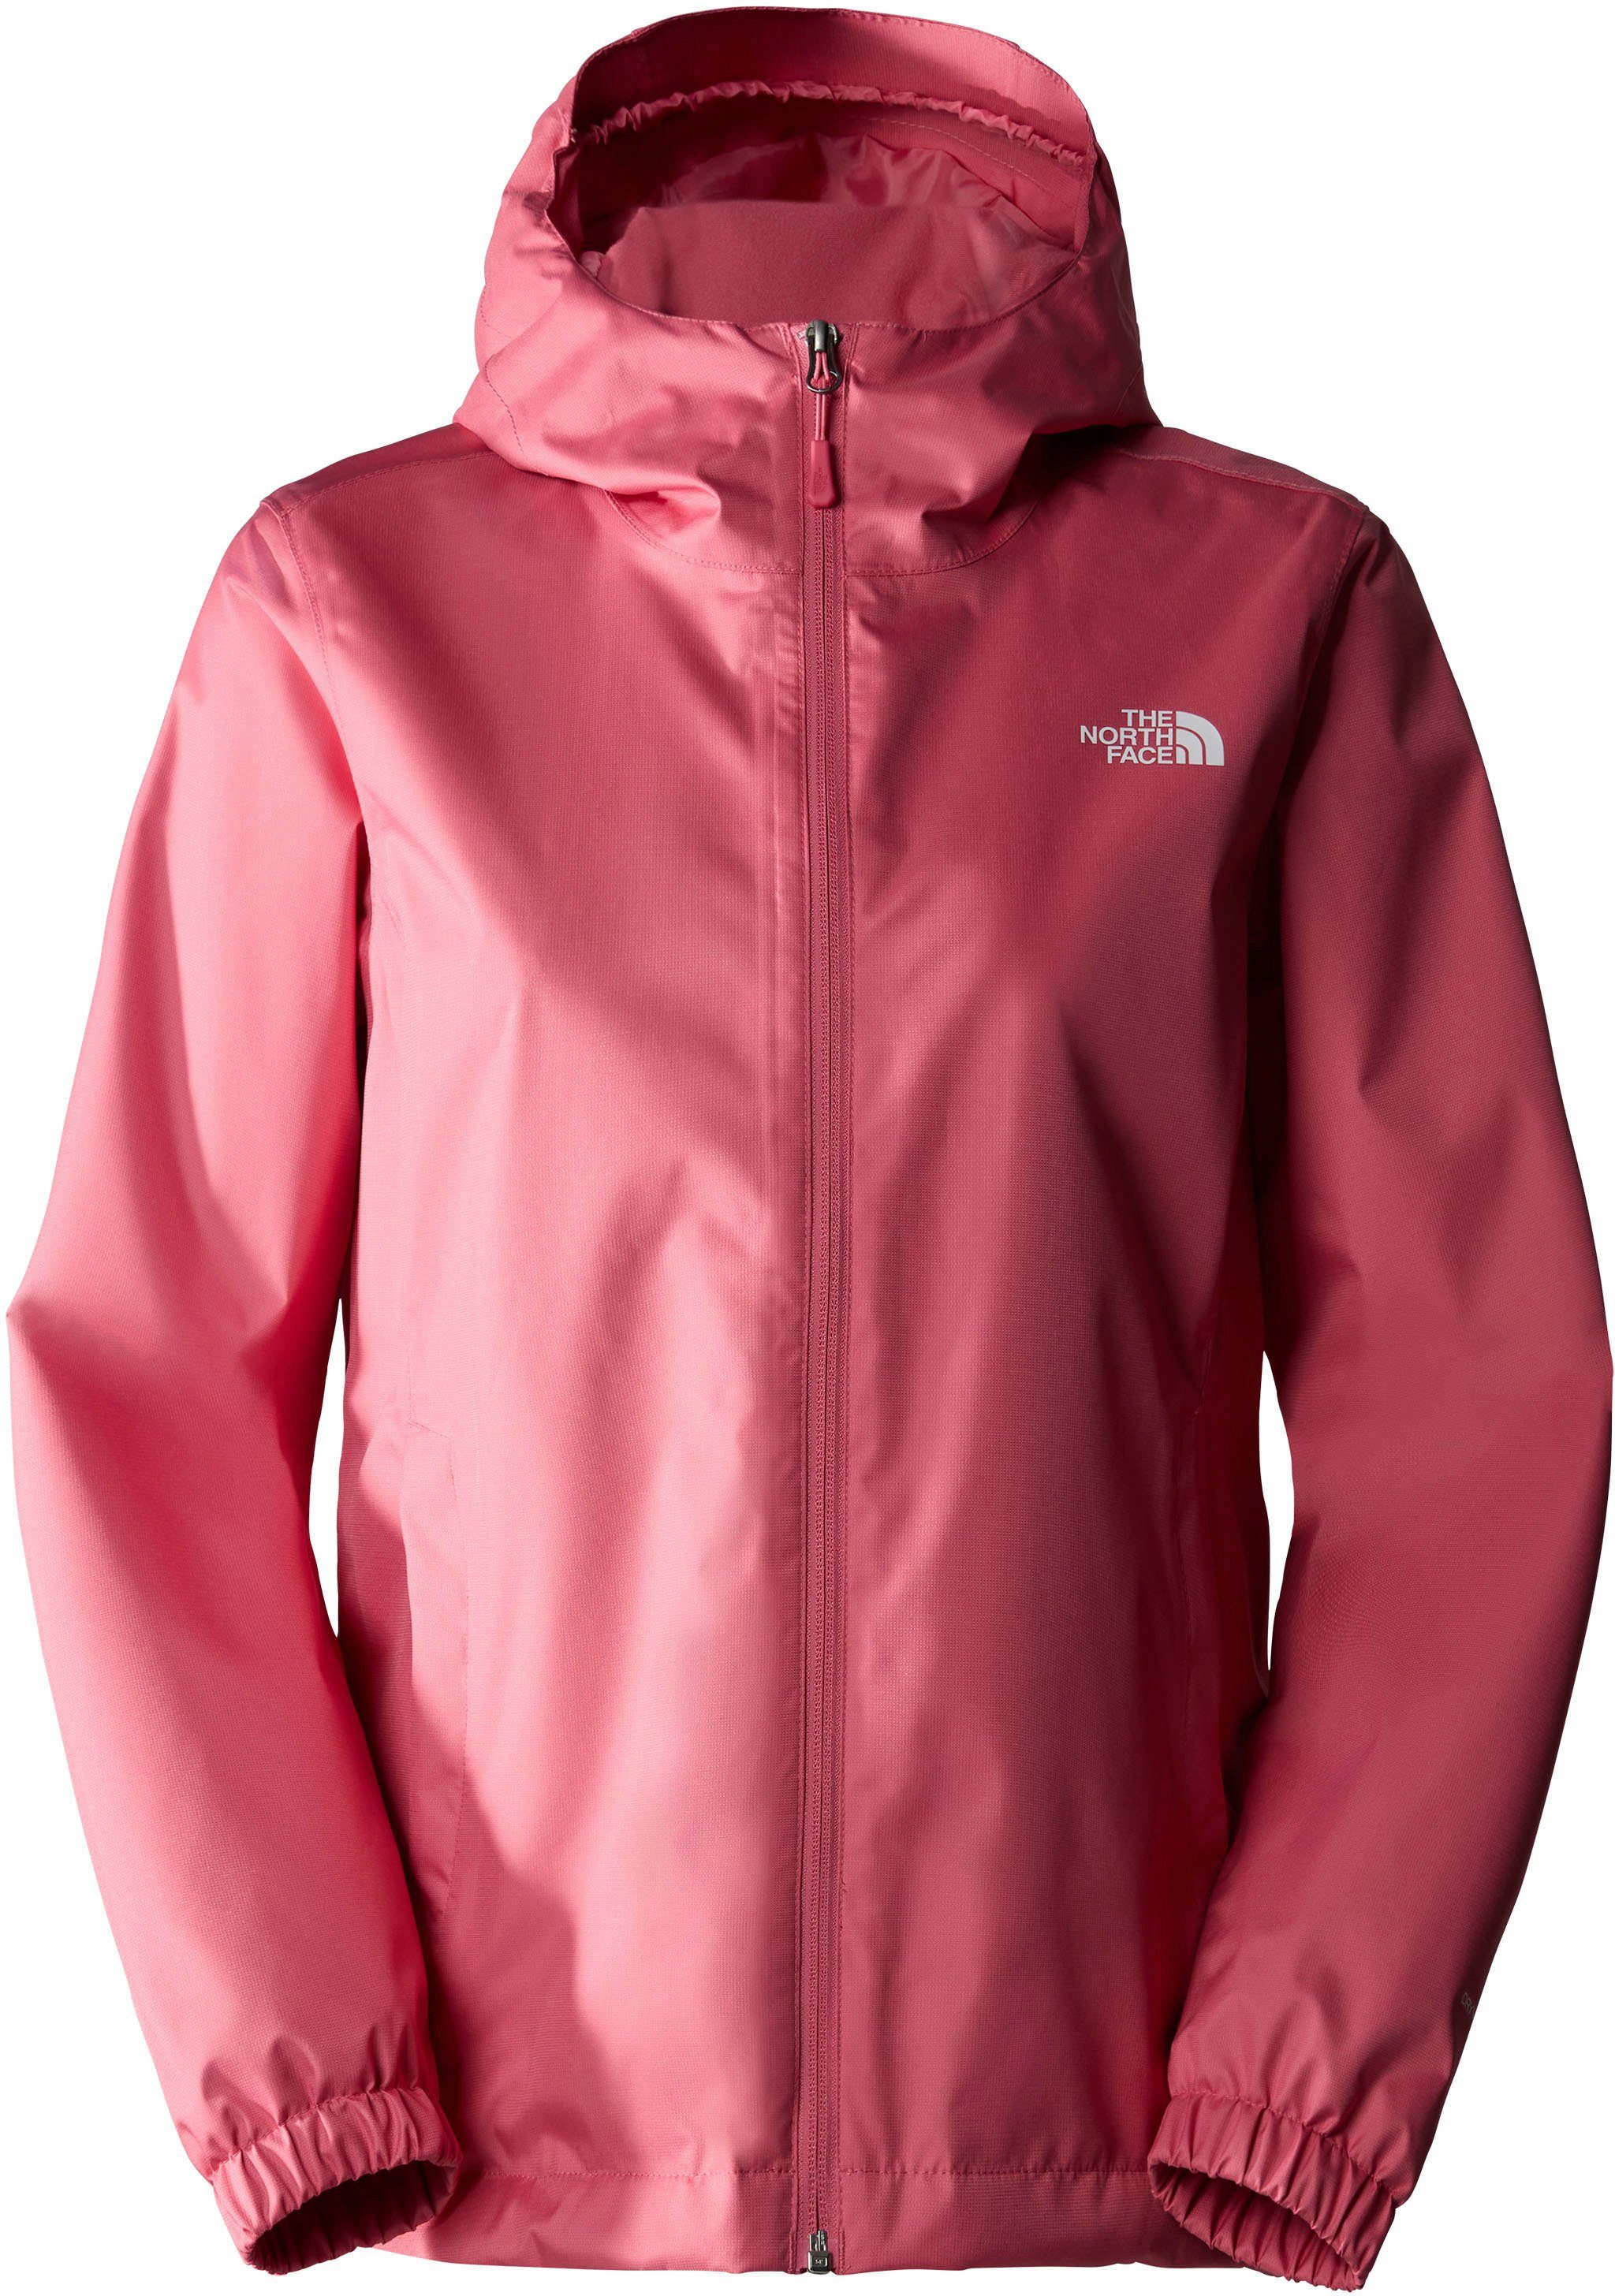 The North Face Funktionsjacke W QUEST cosmo - JACKET Logostickerei pink mit EU (1-St)